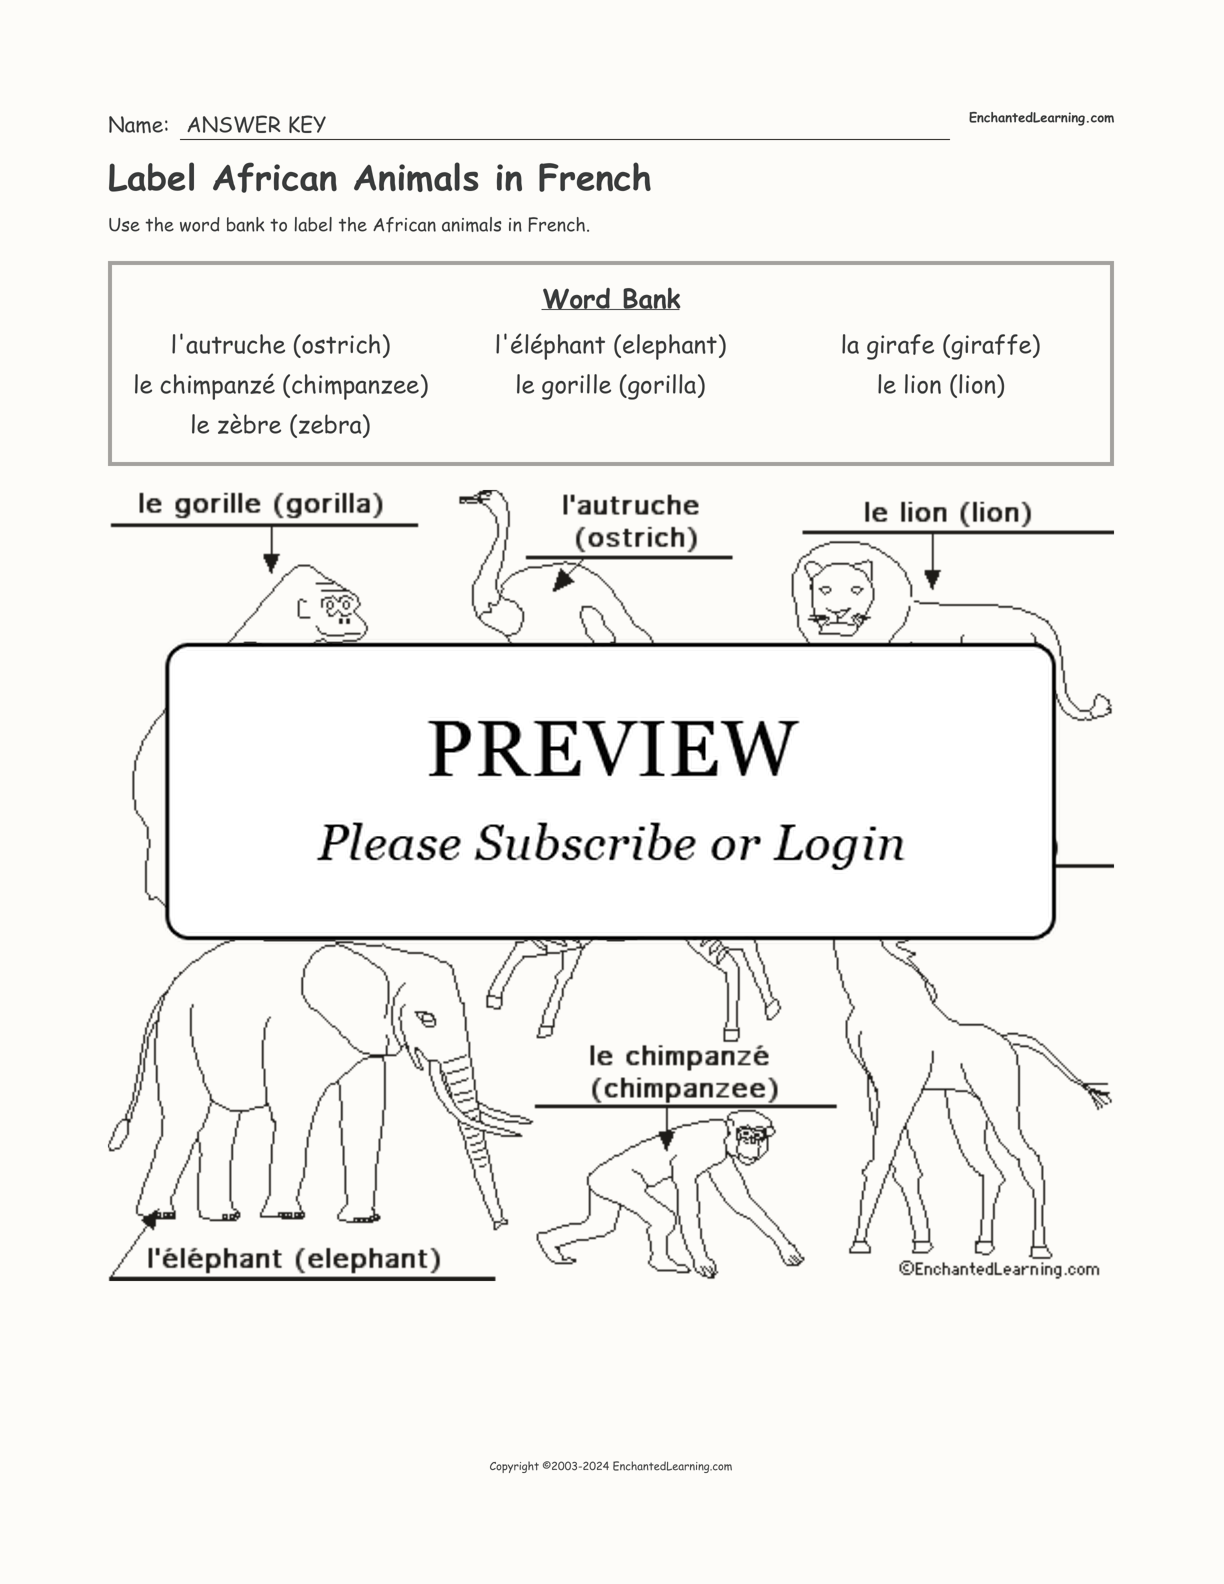 Label African Animals in French interactive worksheet page 2